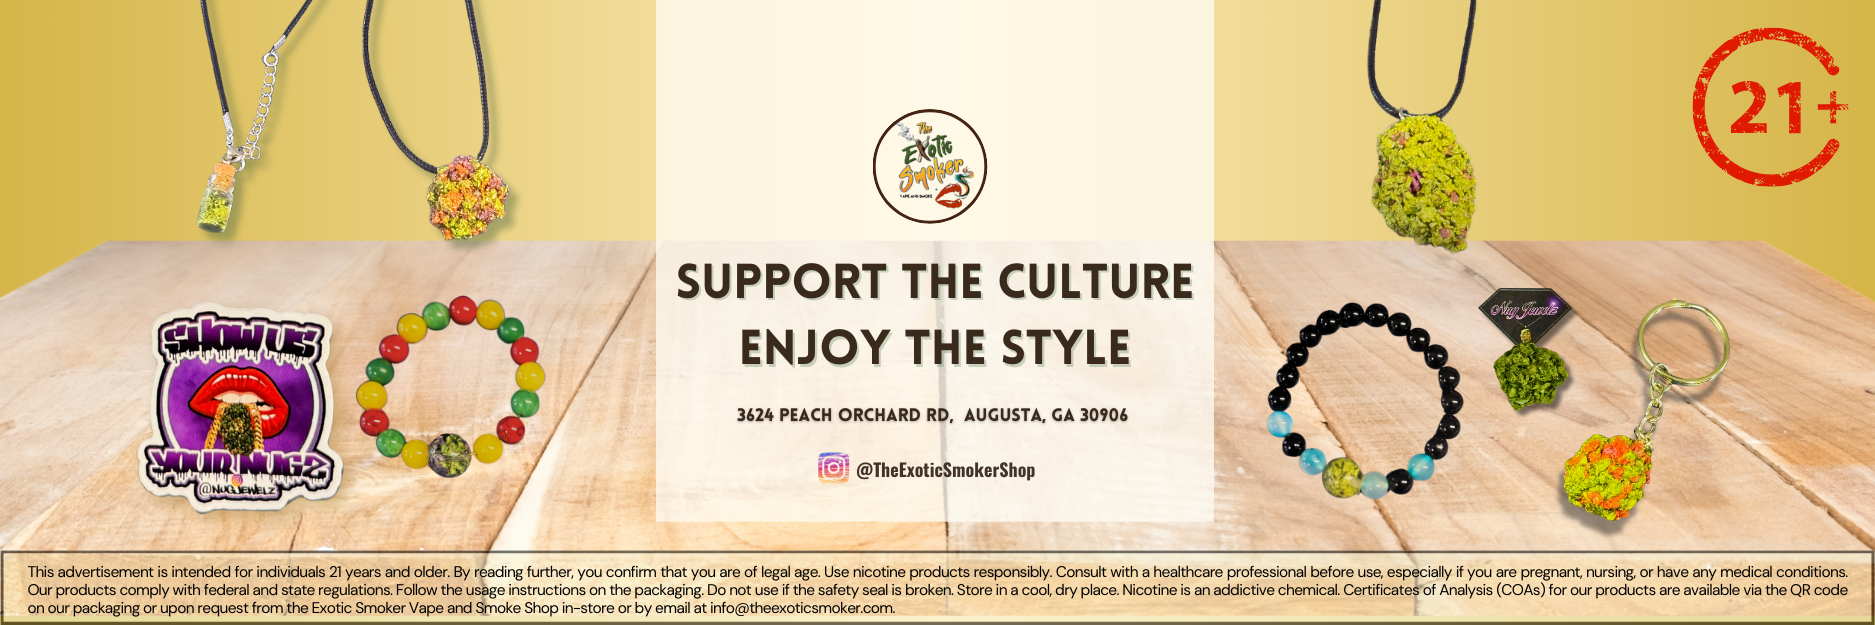 The Exotic Smoker Vape and Smoke Shop - Augusta - GA - Support the Culture and Enjoy the Style - Assortment of Jewelry Handmade Hemp Jewelry Products from the Nug Jewelz Collection